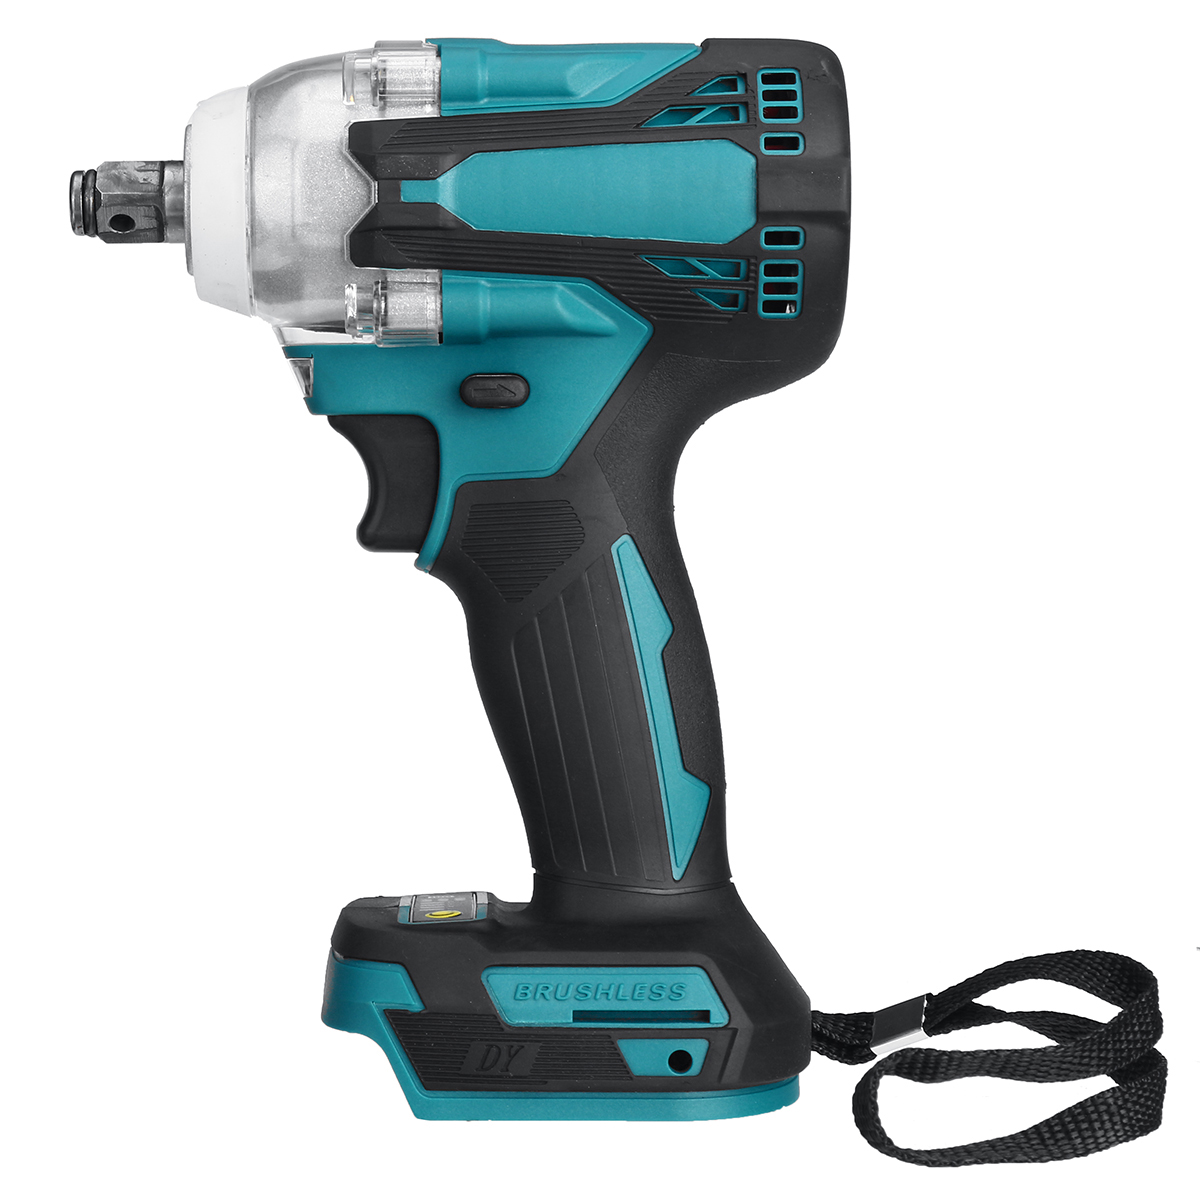 480Nm-Brushless-Impact-Wrench-Cordless-High-Torque-12-Socket-Electric-Wrench-Screwdriver-Power-Tool--1841579-13